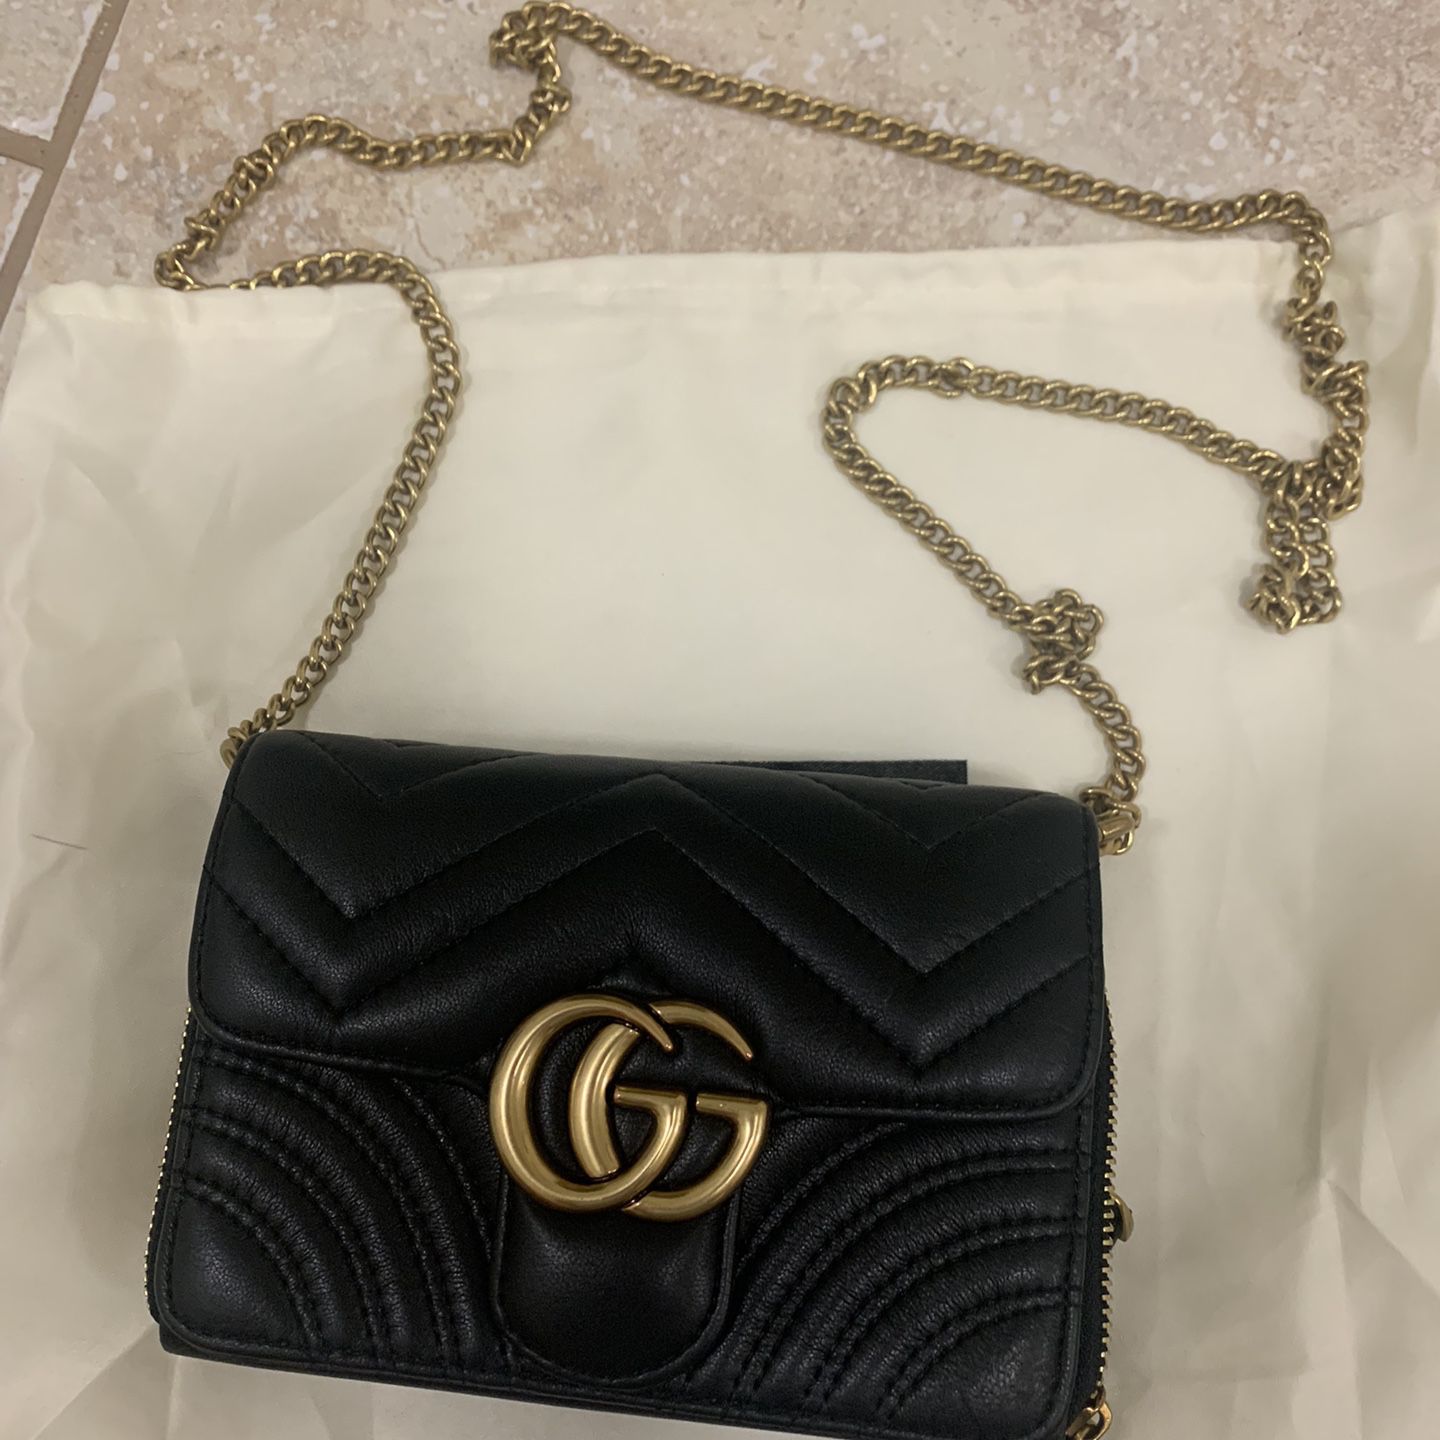 Leather Crossbody Purse - Grey/White Checkered / Gold Chain for Sale in  Phoenix, AZ - OfferUp